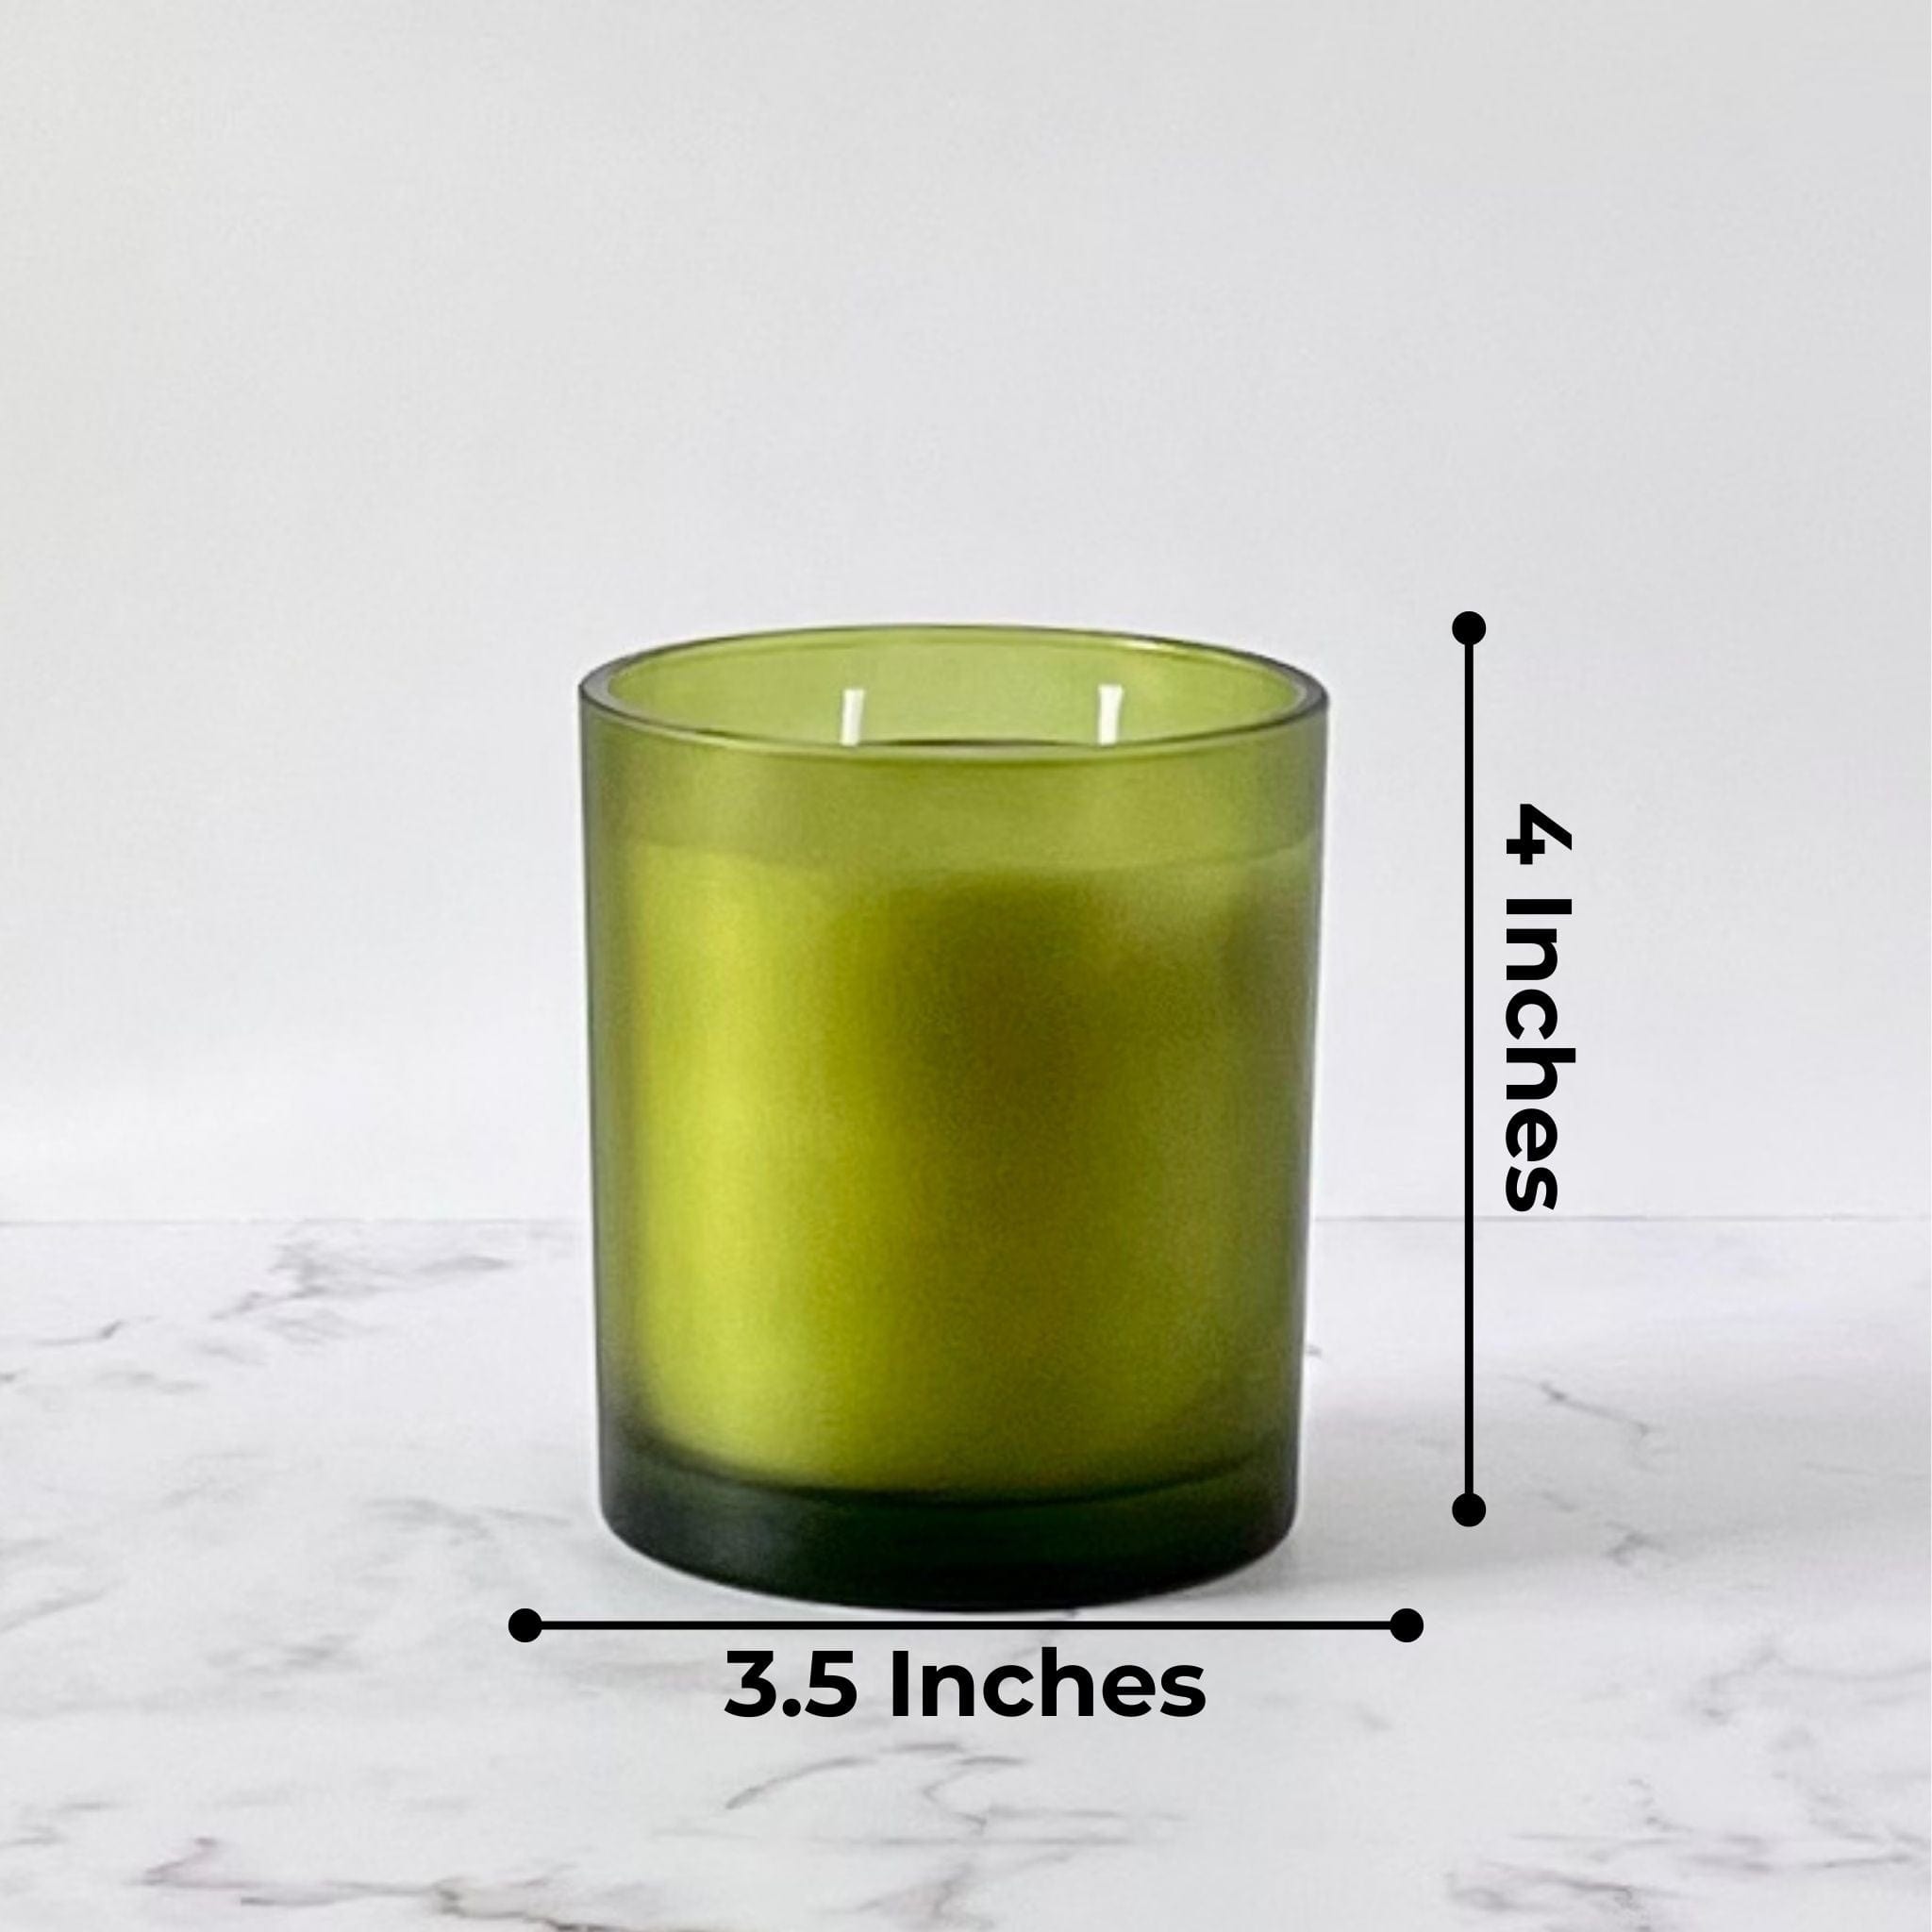 Private Label Candles by Velavida Candles 14 Oz Green Frosted Candle (12 Candles)